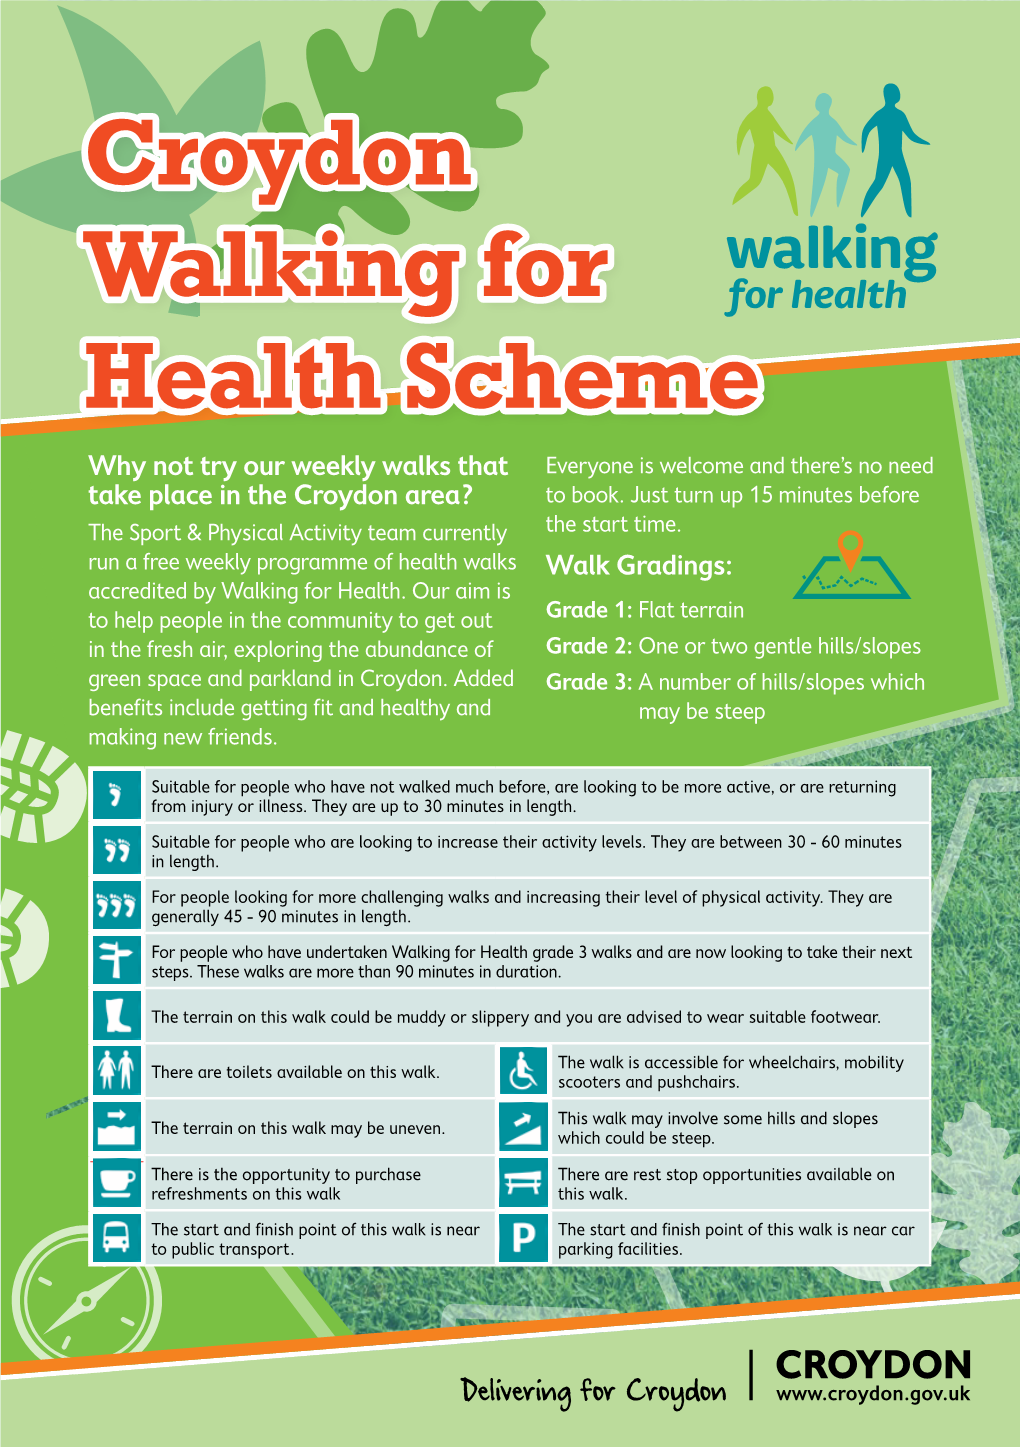 Croydon Walking for Health Scheme Why Not Try Our Weekly Walks That Everyone Is Welcome and There’S No Need Take Place in the Croydon Area? to Book